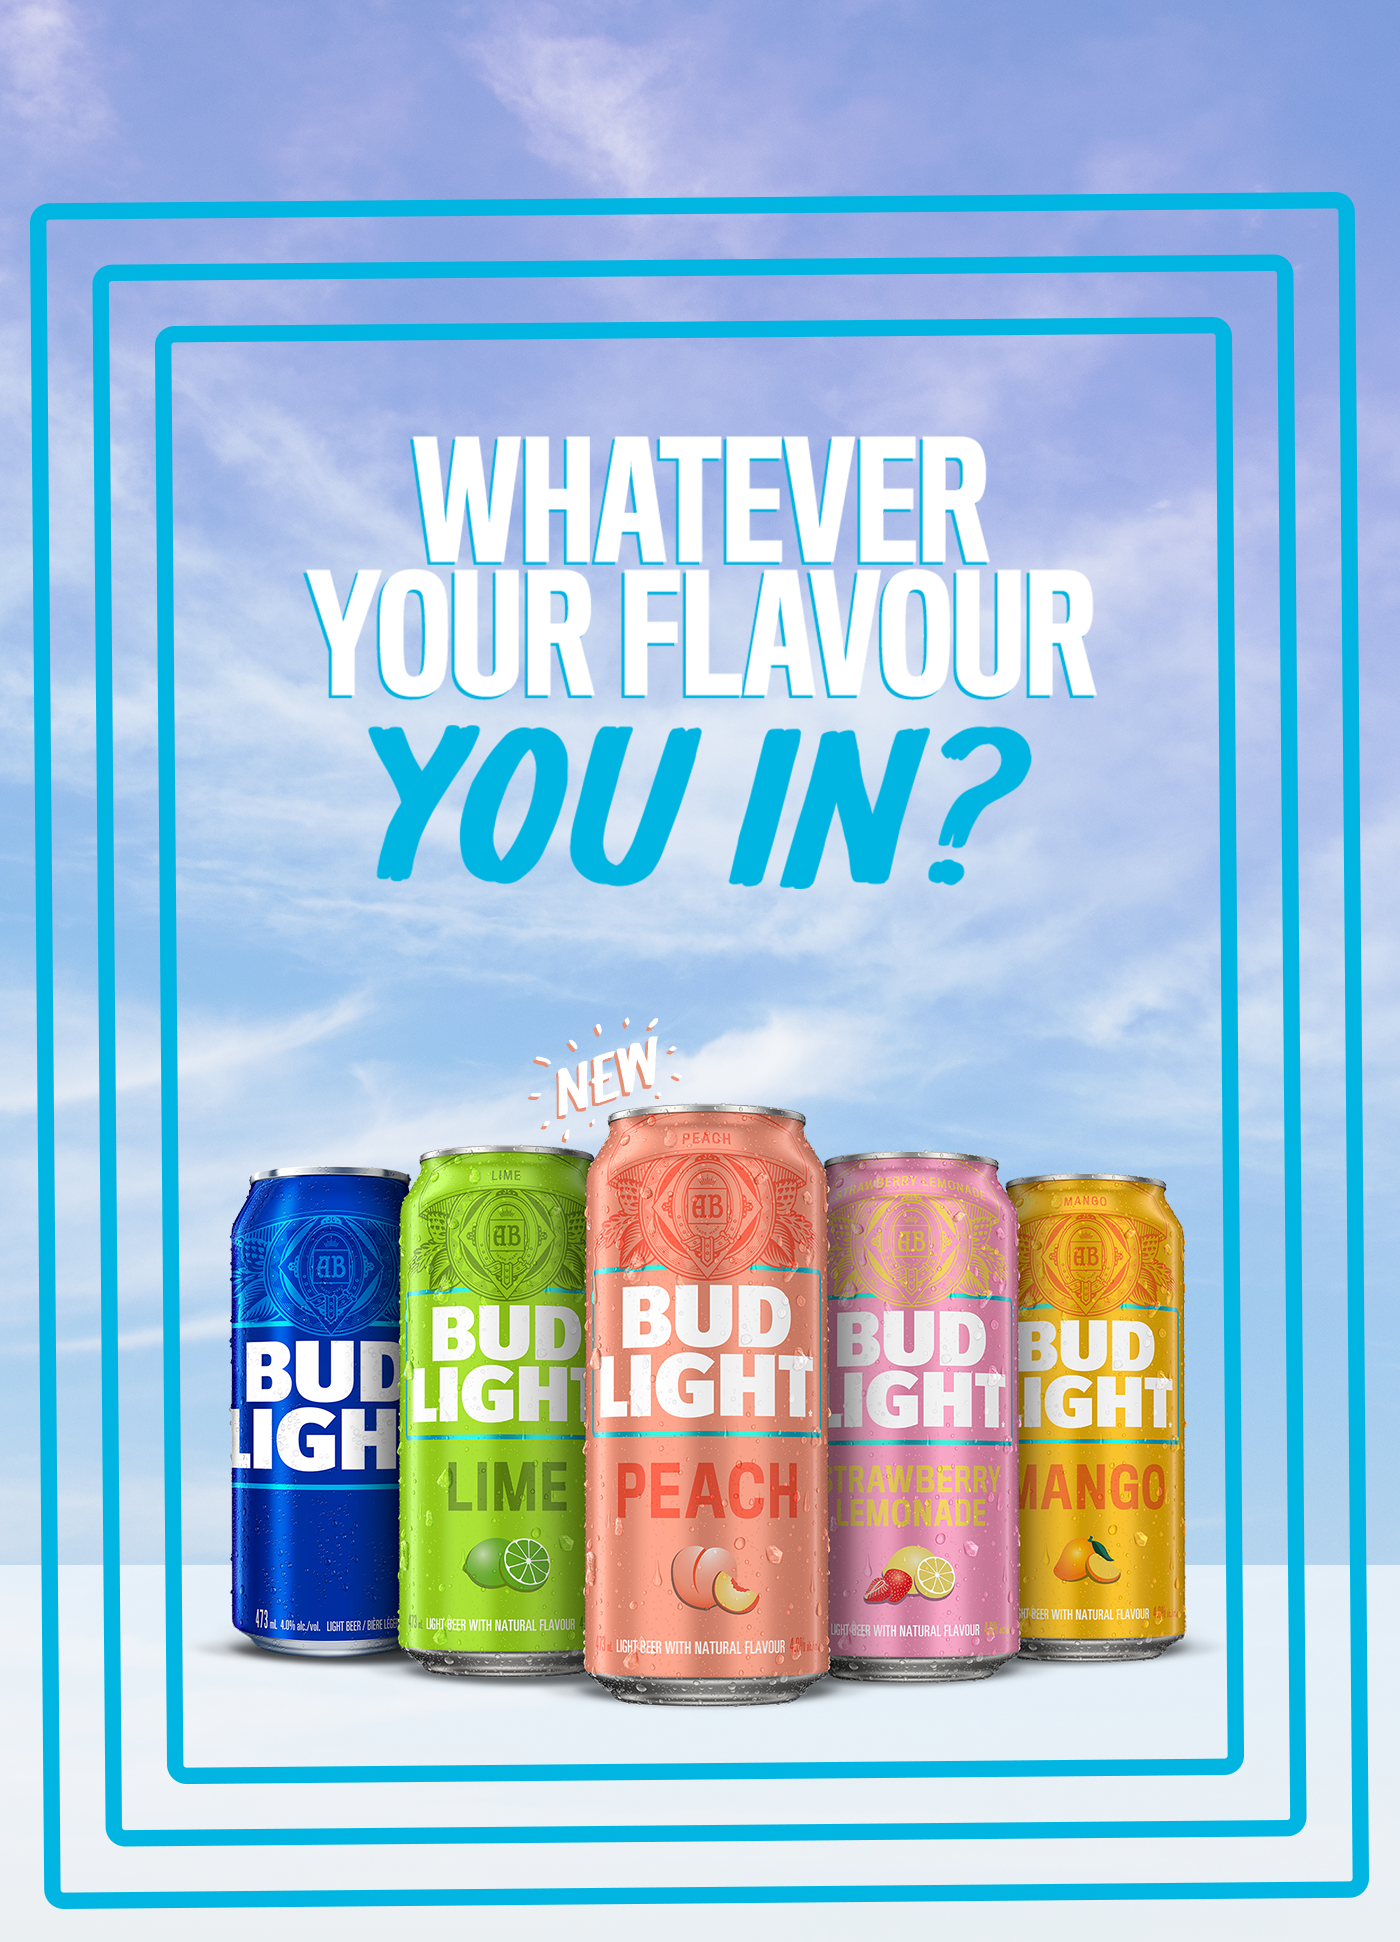 Whatever your flavor - you in?